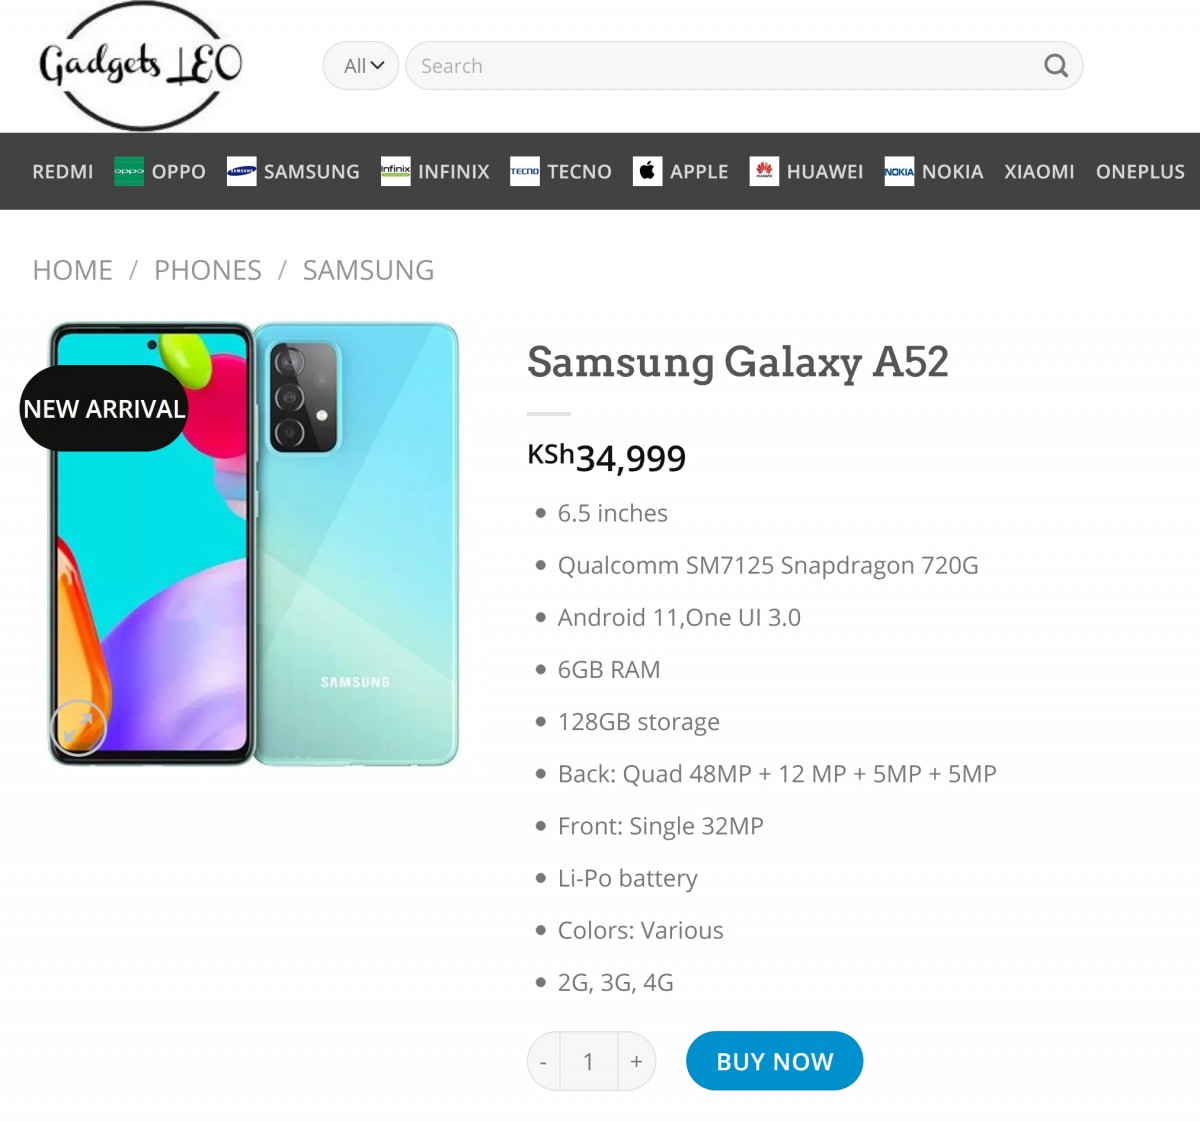 Unannounced Samsung Galaxy A52 appears in online store again, with price and ready to ship